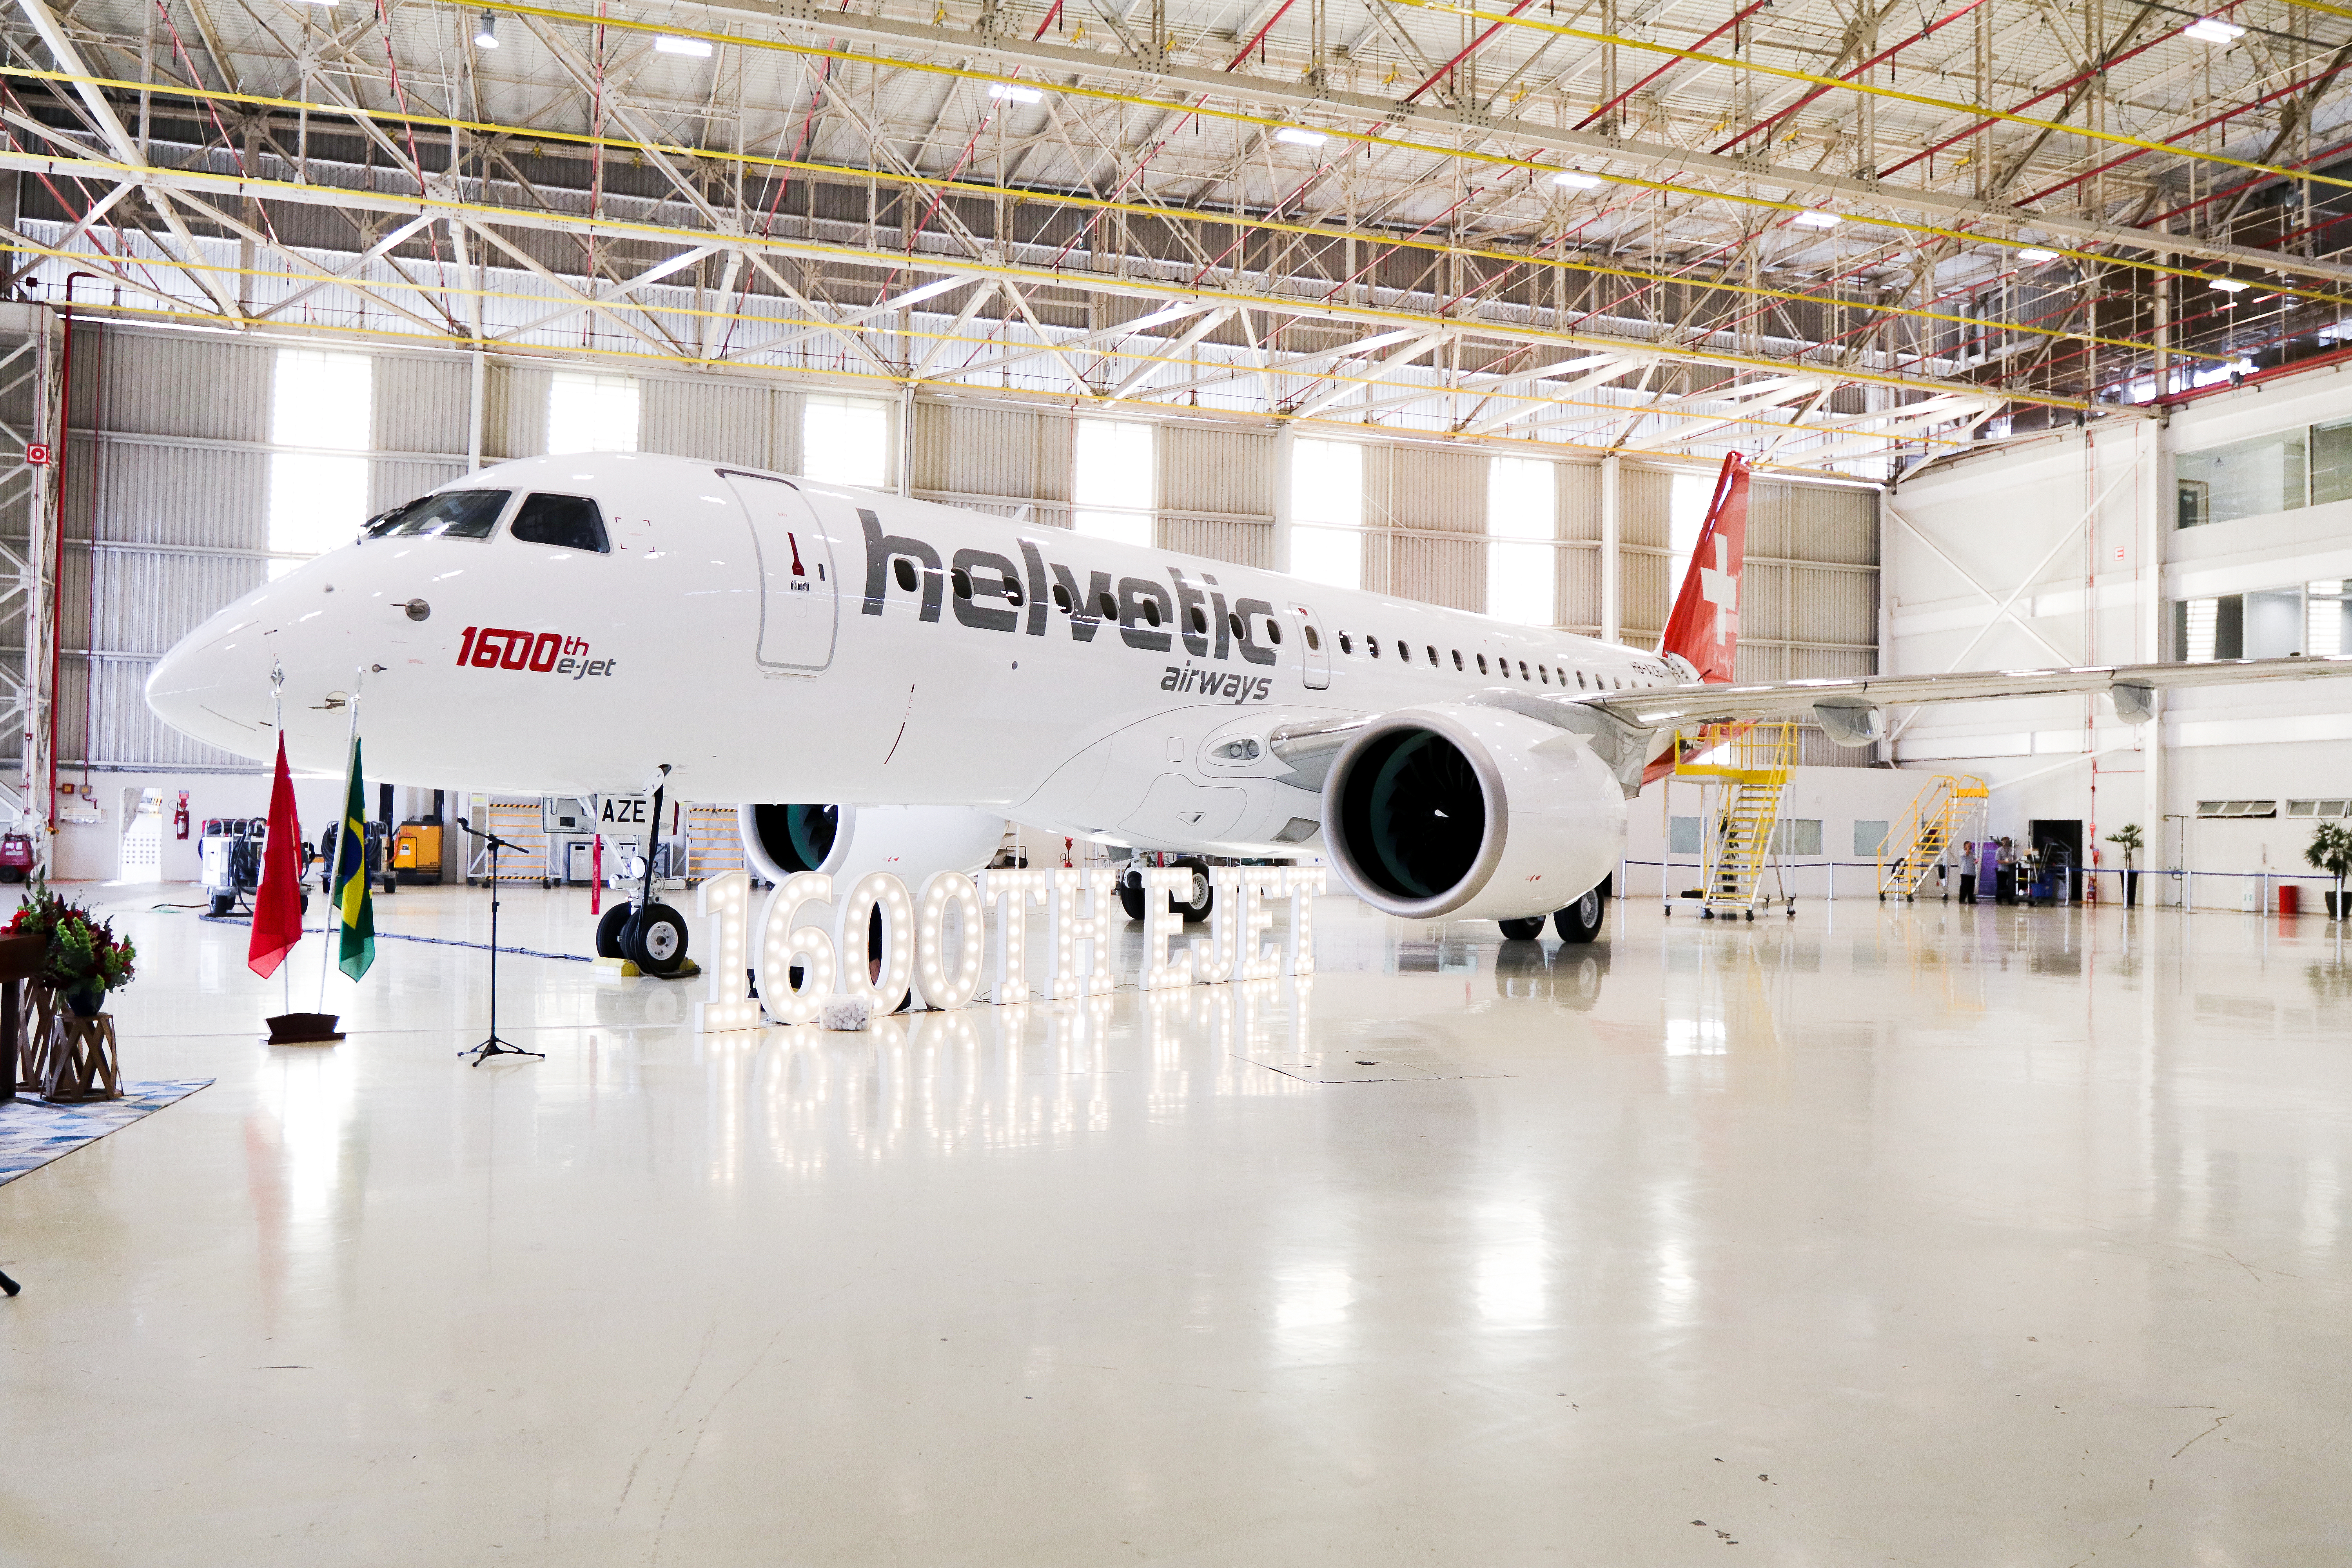 Embraer’s 1,600th E-Jet delivered to Helvetic Airways